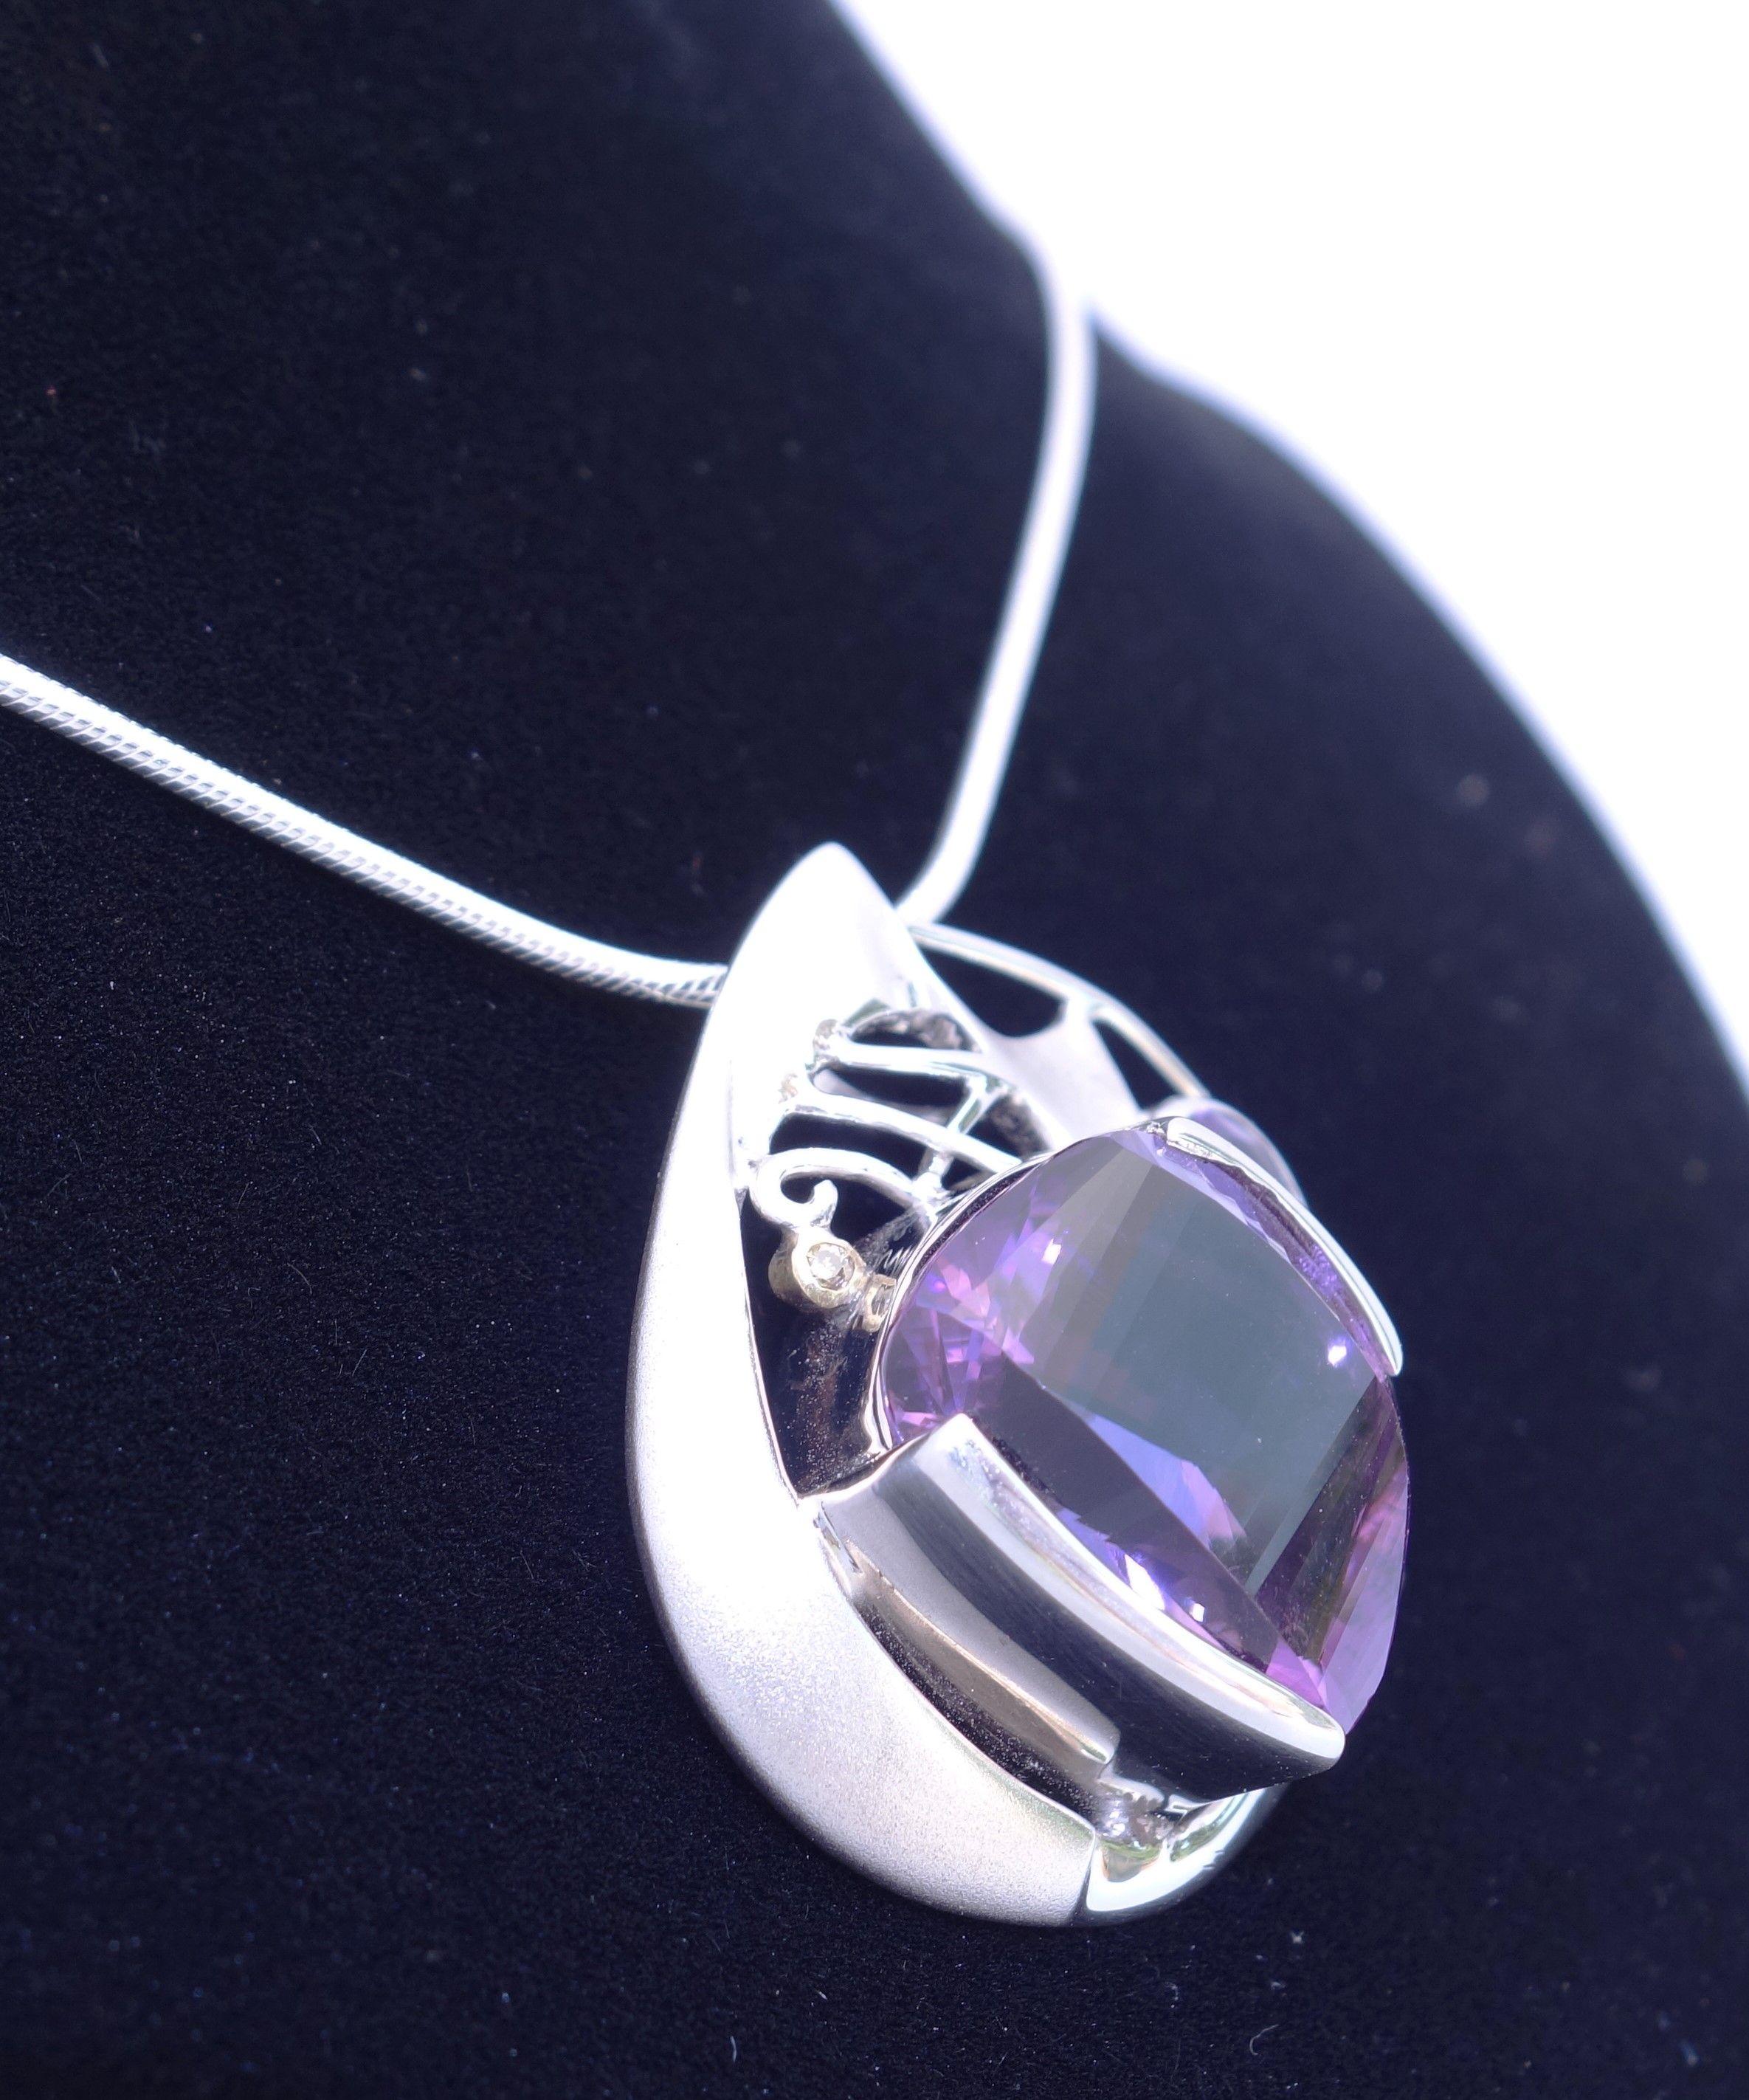 Simply Beautiful! Amethyst and Diamond Gold and Sterling Silver Pendant Necklace. Centering a Fancy cut Amethyst, weighing approx. 18.74 Carats, measuring: 20.5mm x 15mm and 8mm x 6mm. Accented by an Oval Amethyst, weighing approx. 2.04 Carats and 3